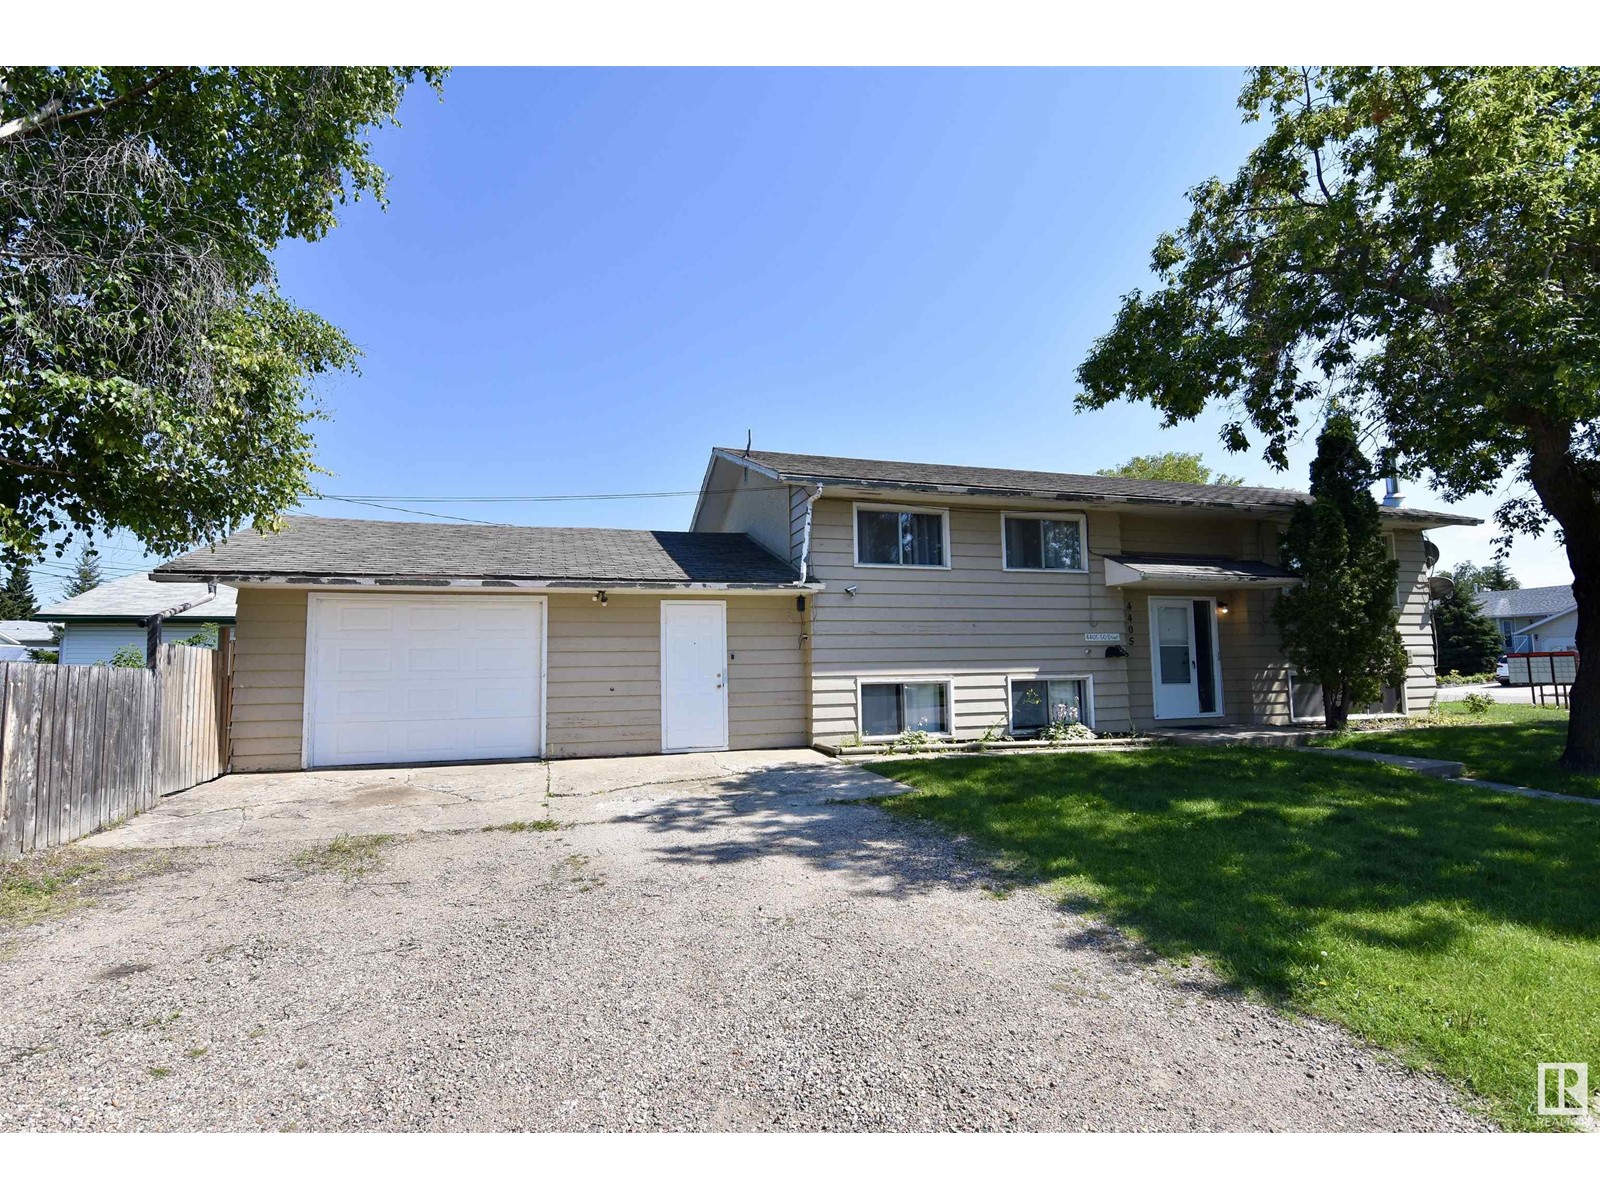 4405 50 ST located in St. Paul Town, Alberta